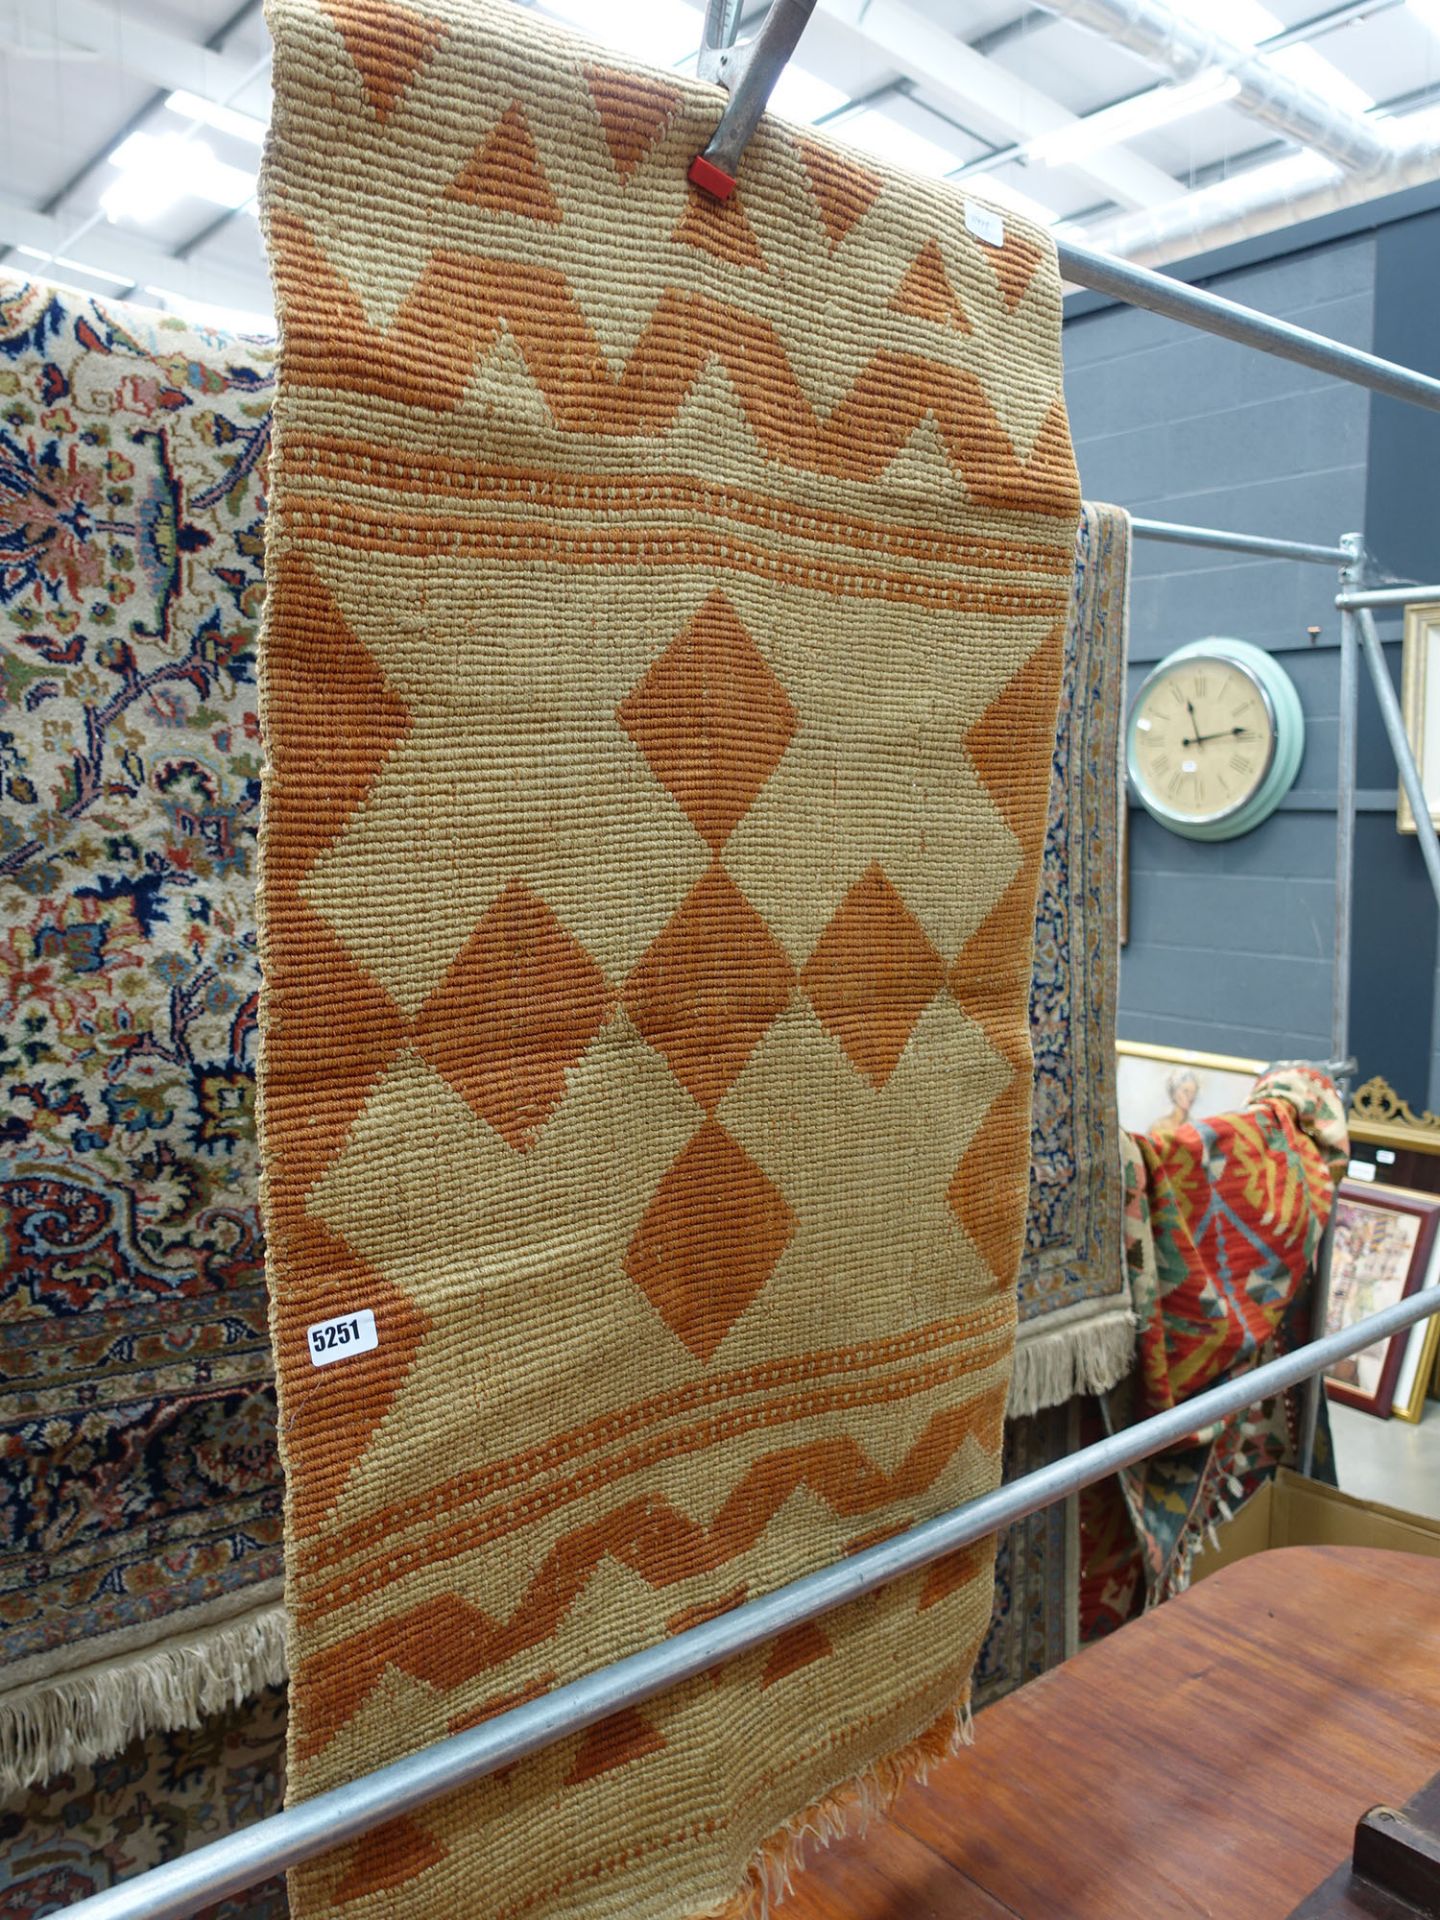 Terracotta and beige diamond patterned mat